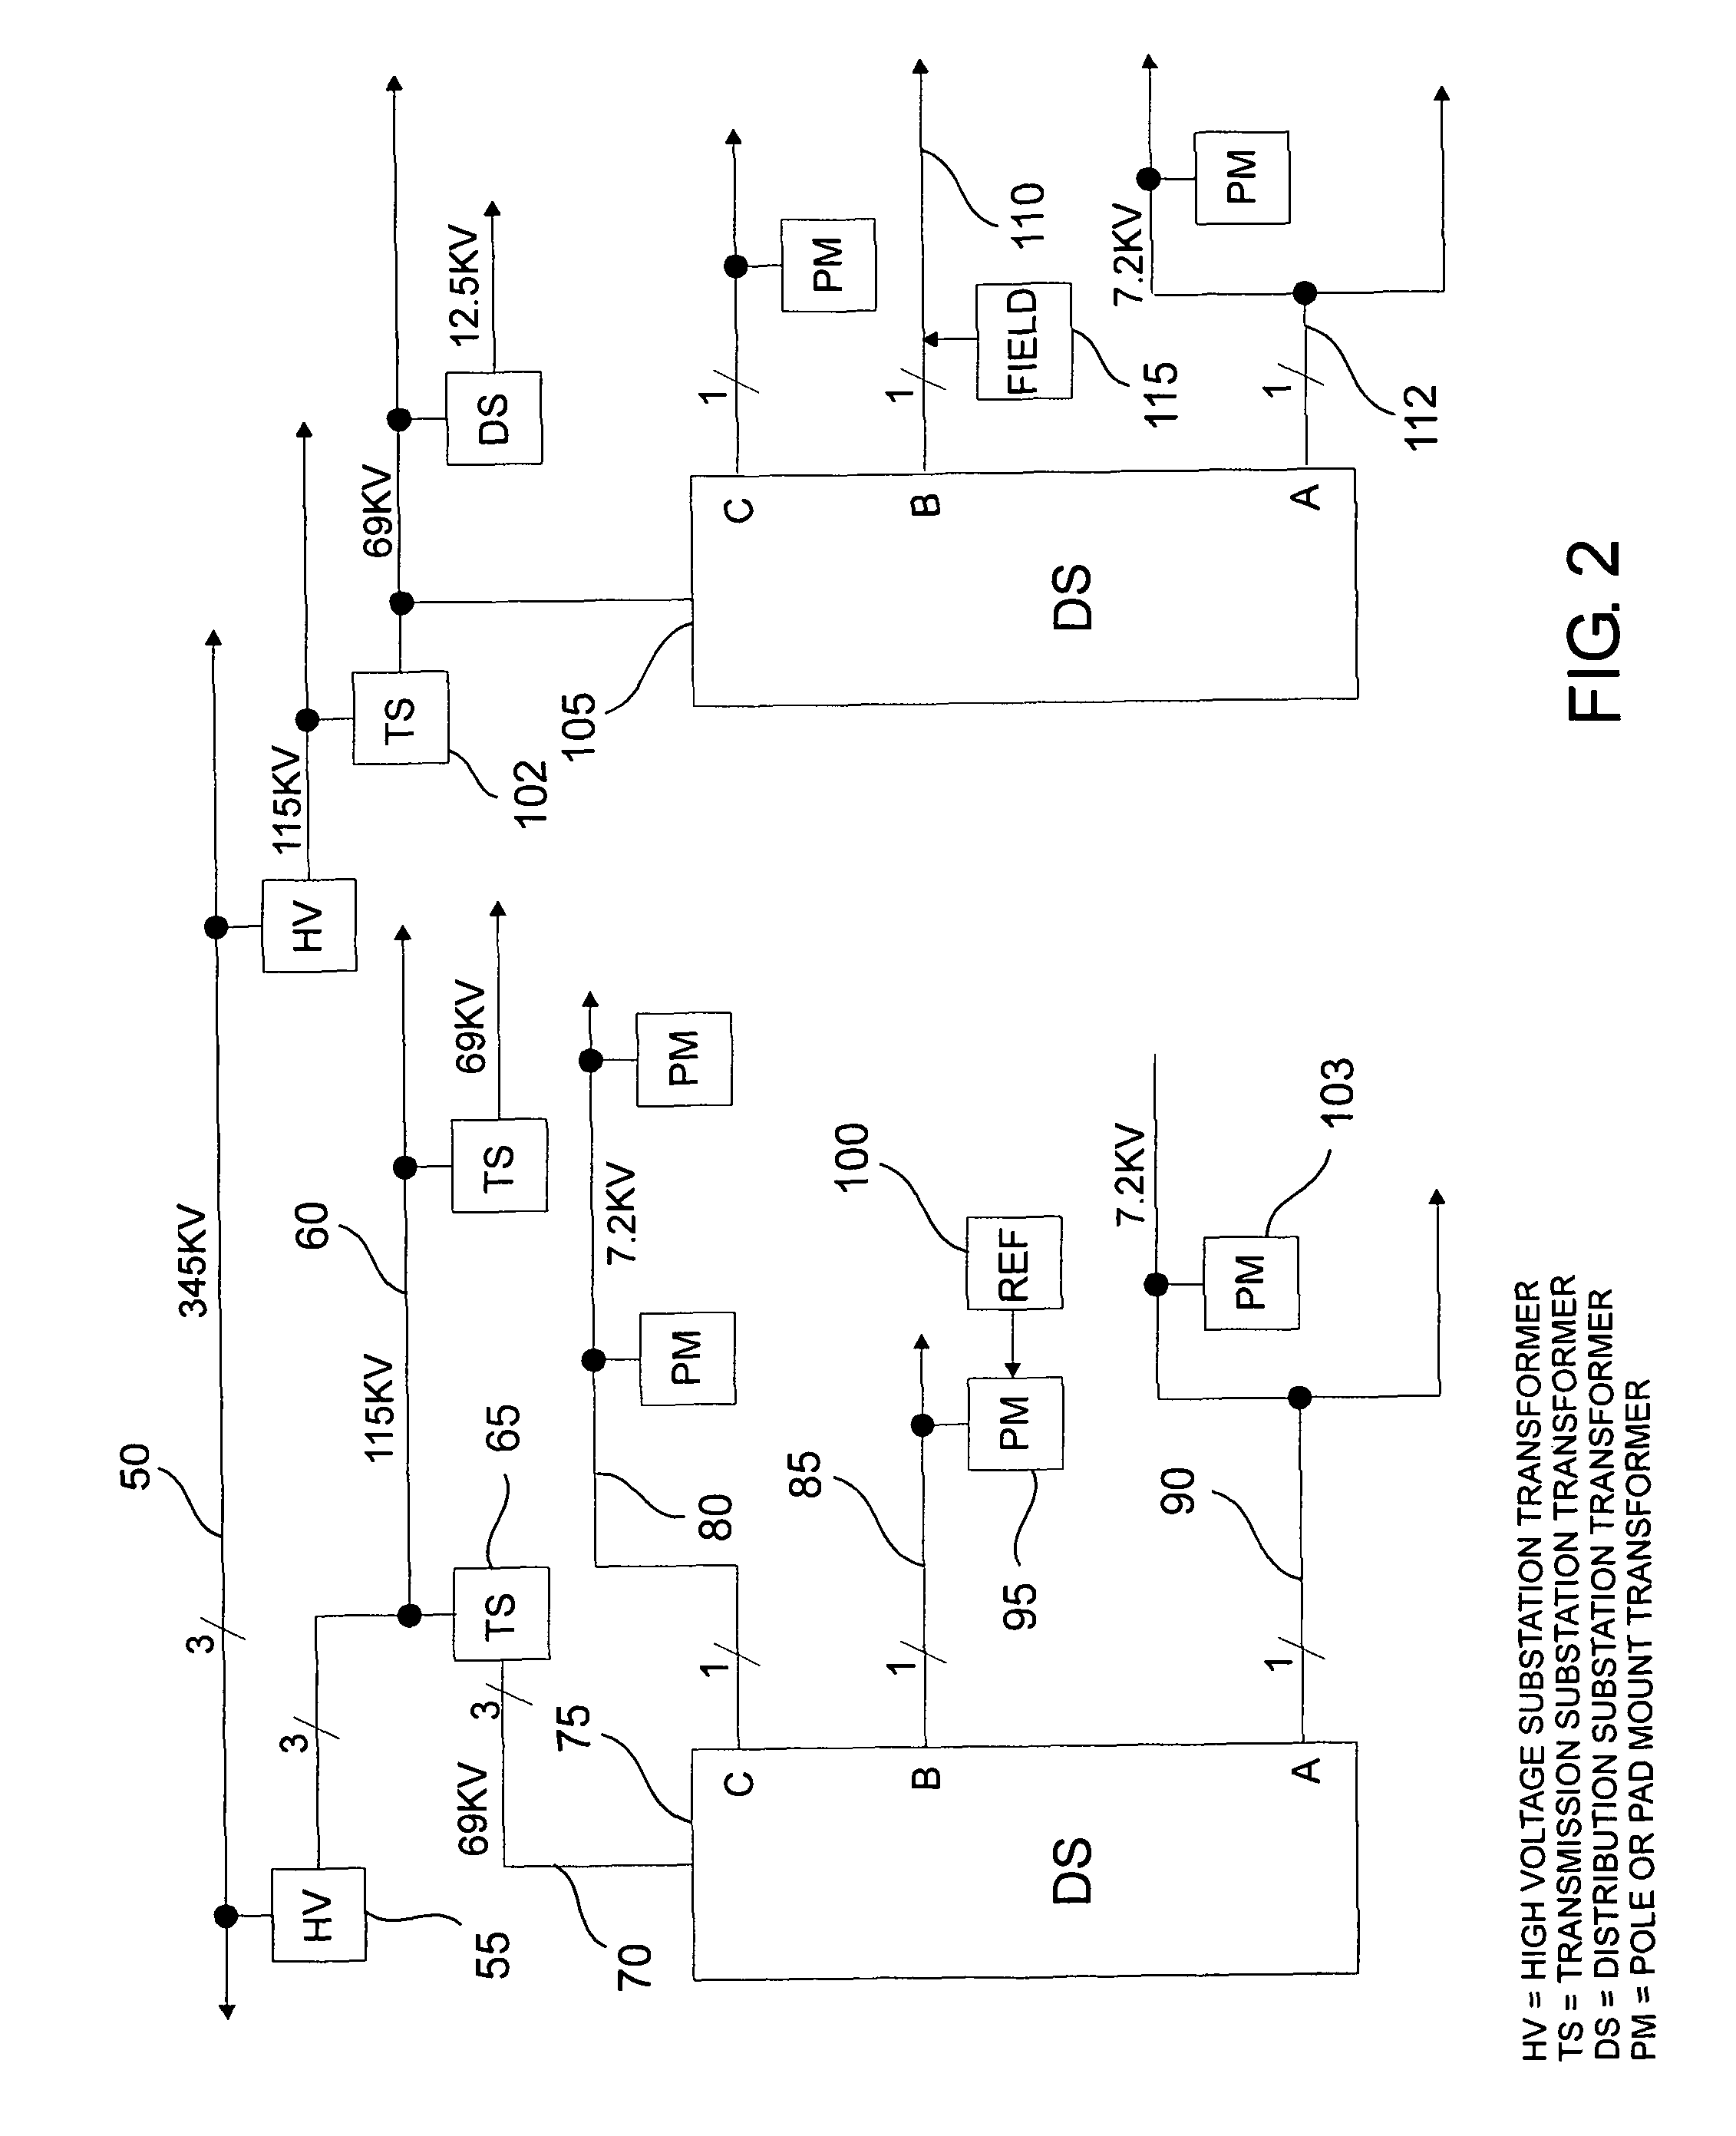 Non-contact phase identification method and apparatus